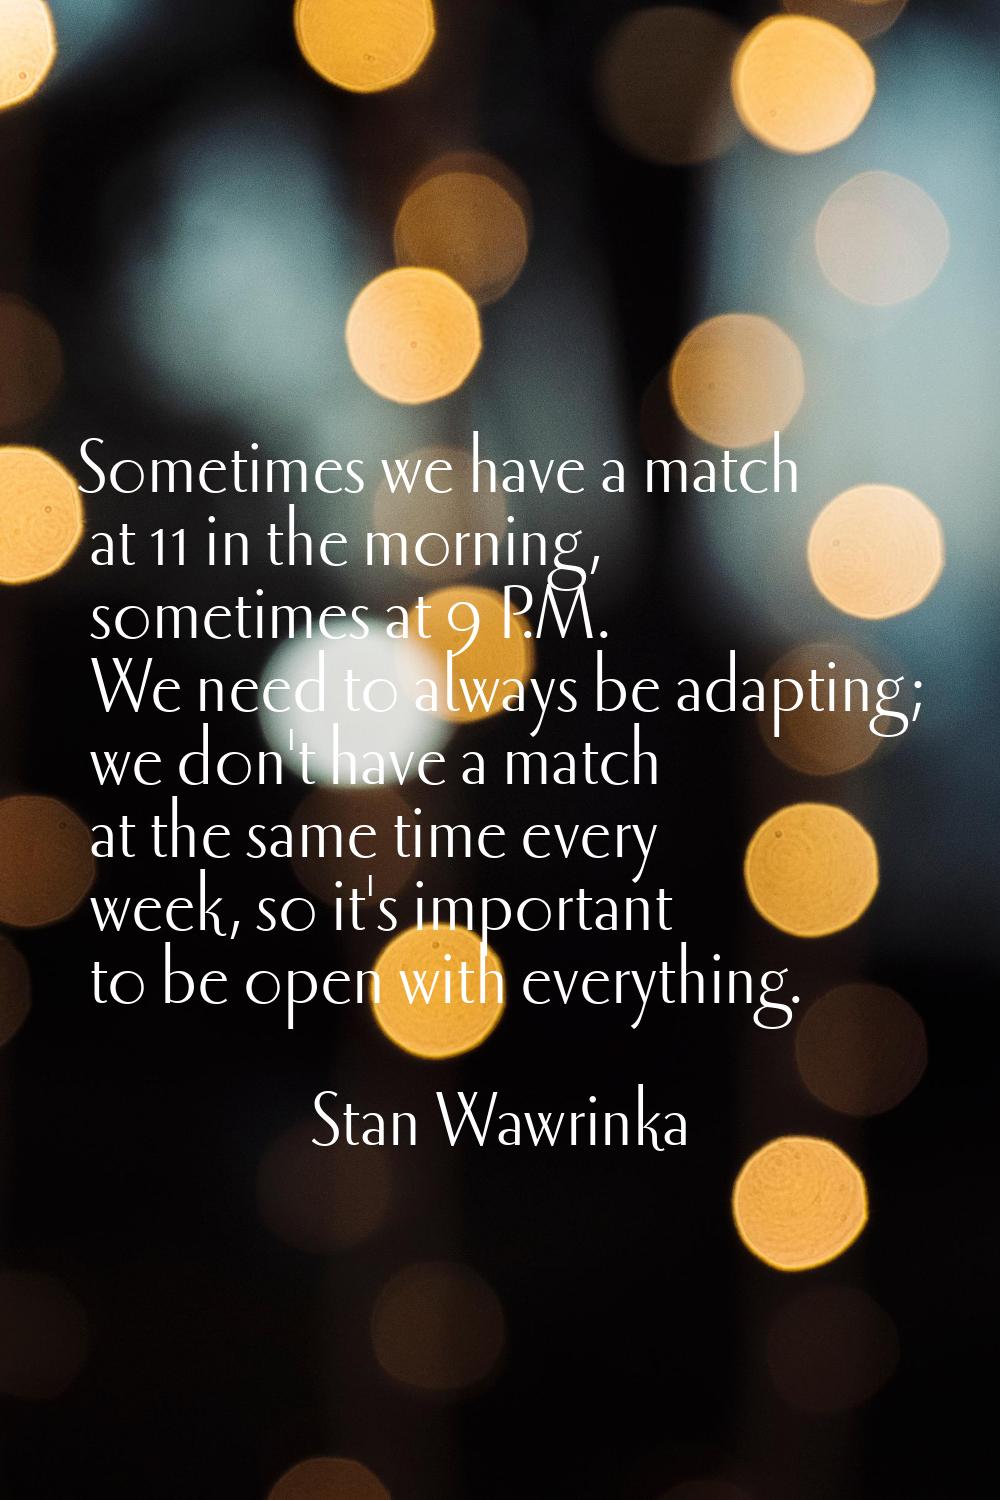 Sometimes we have a match at 11 in the morning, sometimes at 9 P.M. We need to always be adapting; 